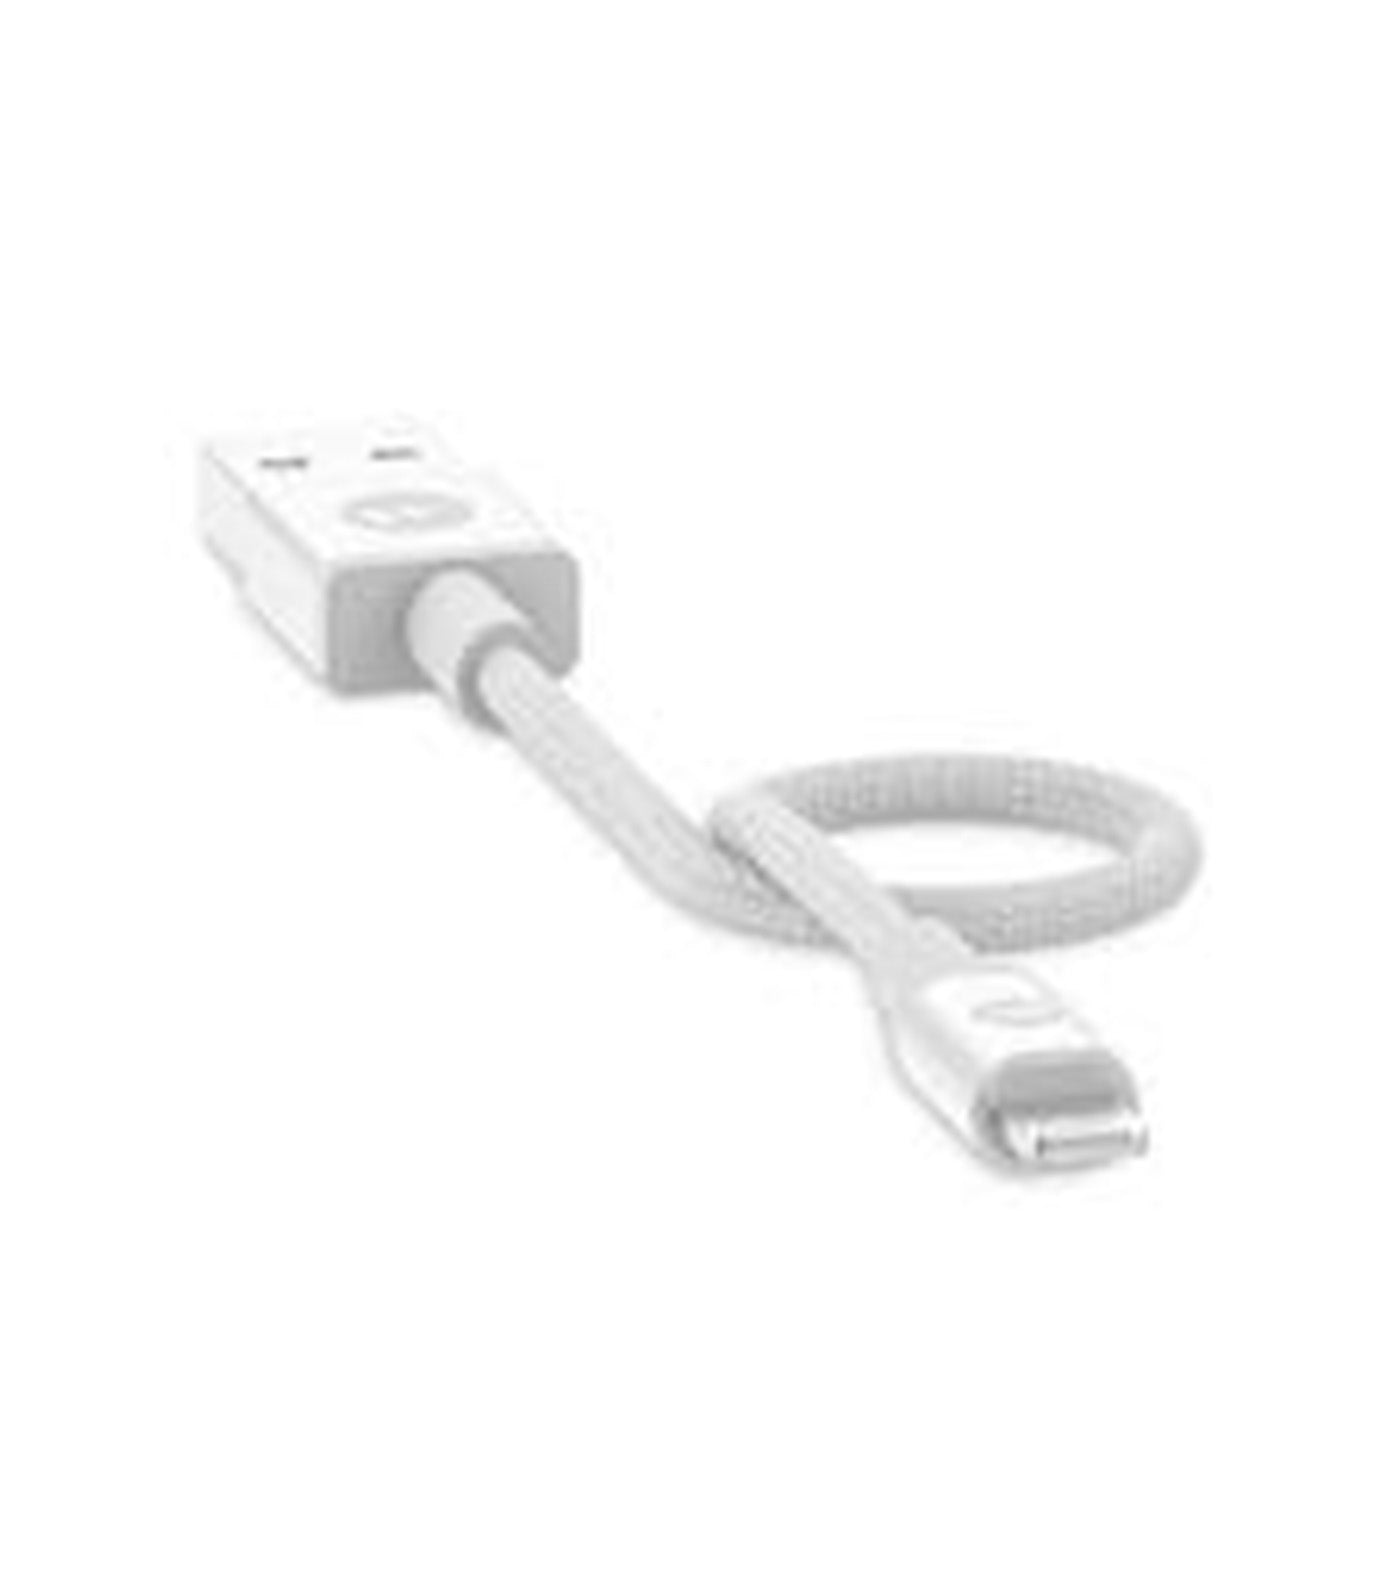 mophie USB-A Cable with Lightning Connector (3 m)